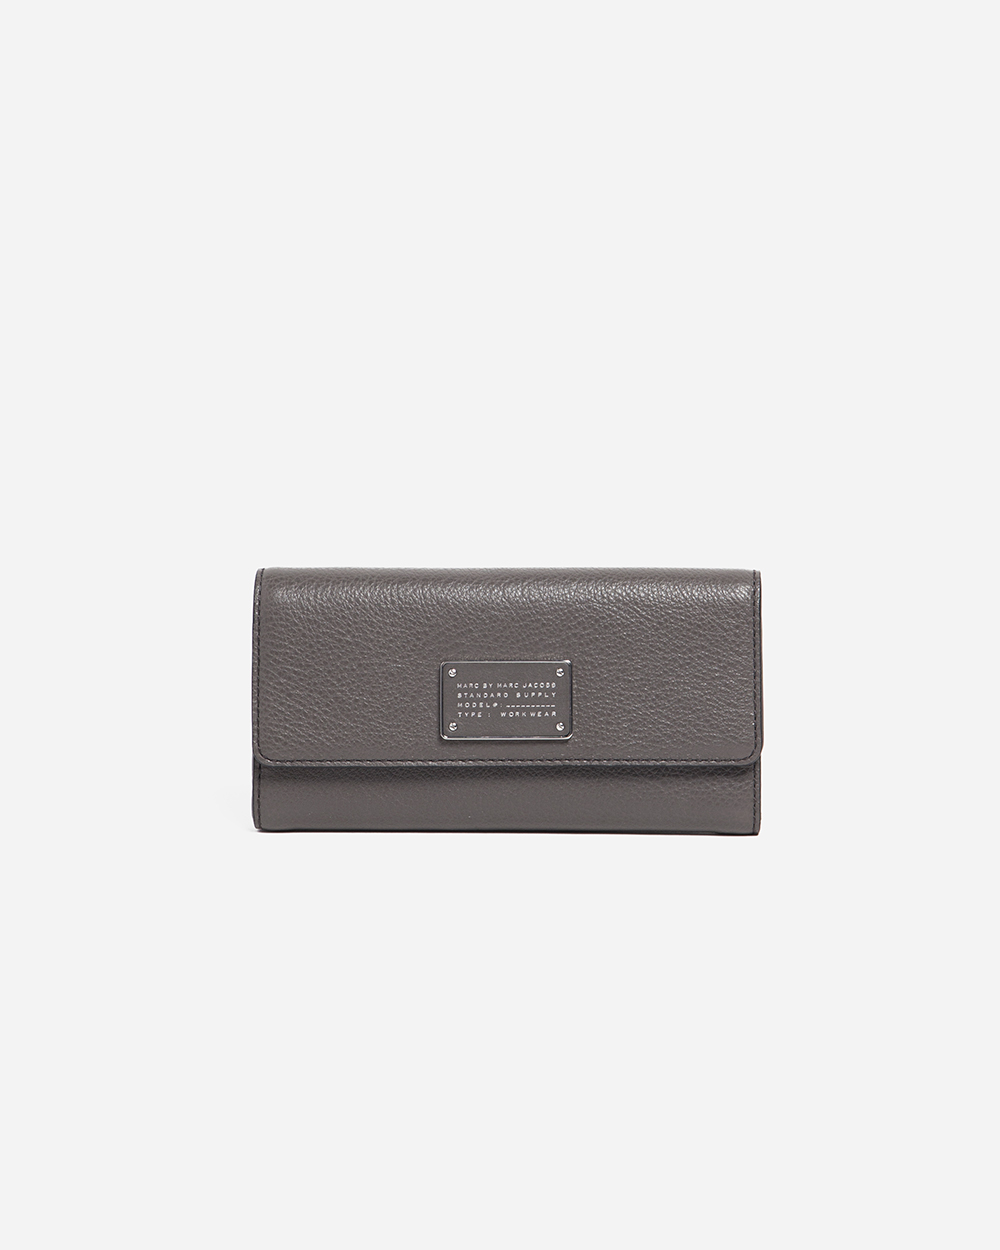 Marc by Marc Jacobs long trifold wallet